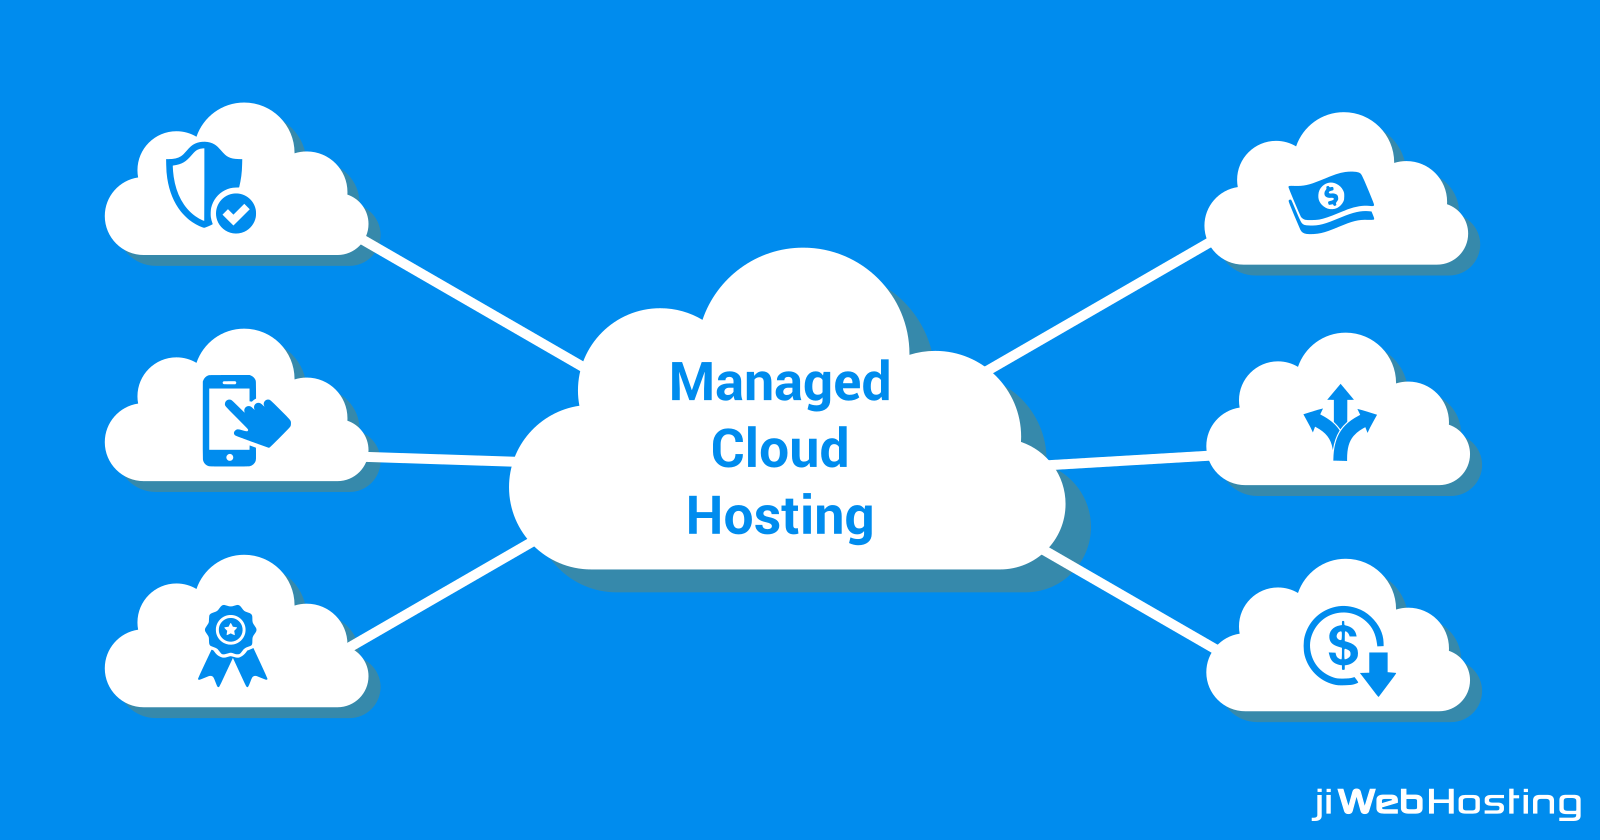 How Managed Cloud Hosting is Beneficial for Your Business?